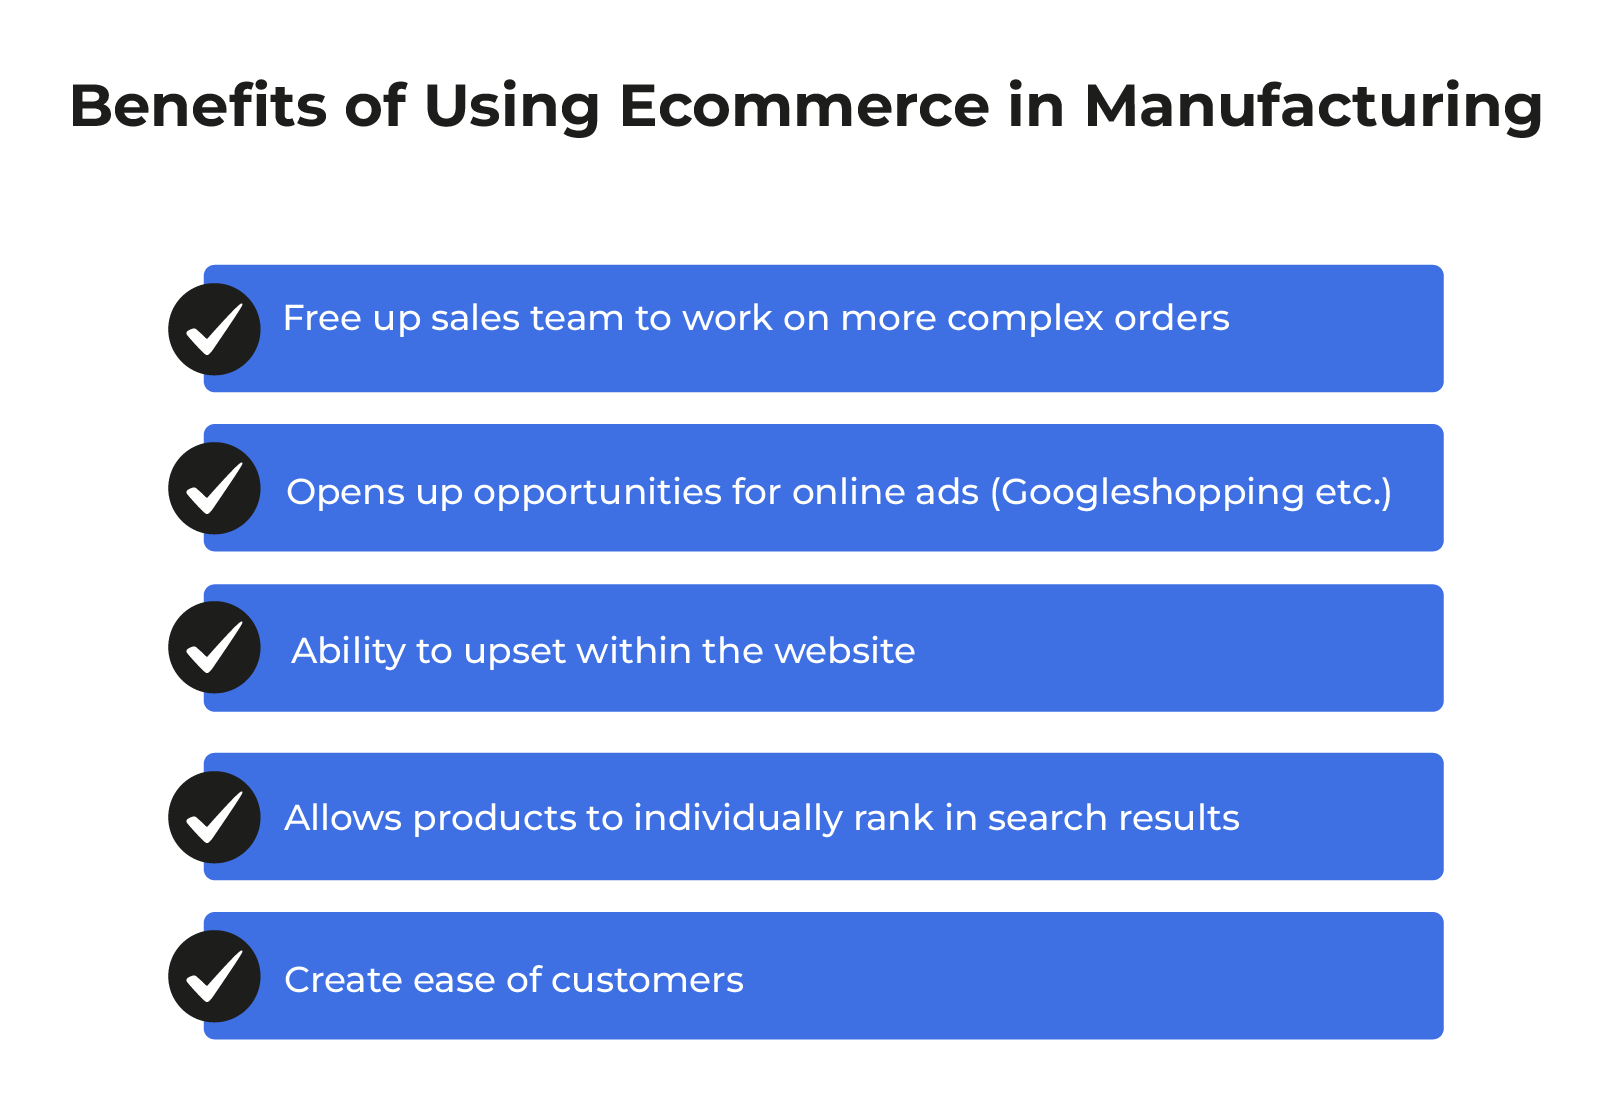 Benefits of Ecommerce in Manufacturing Industry